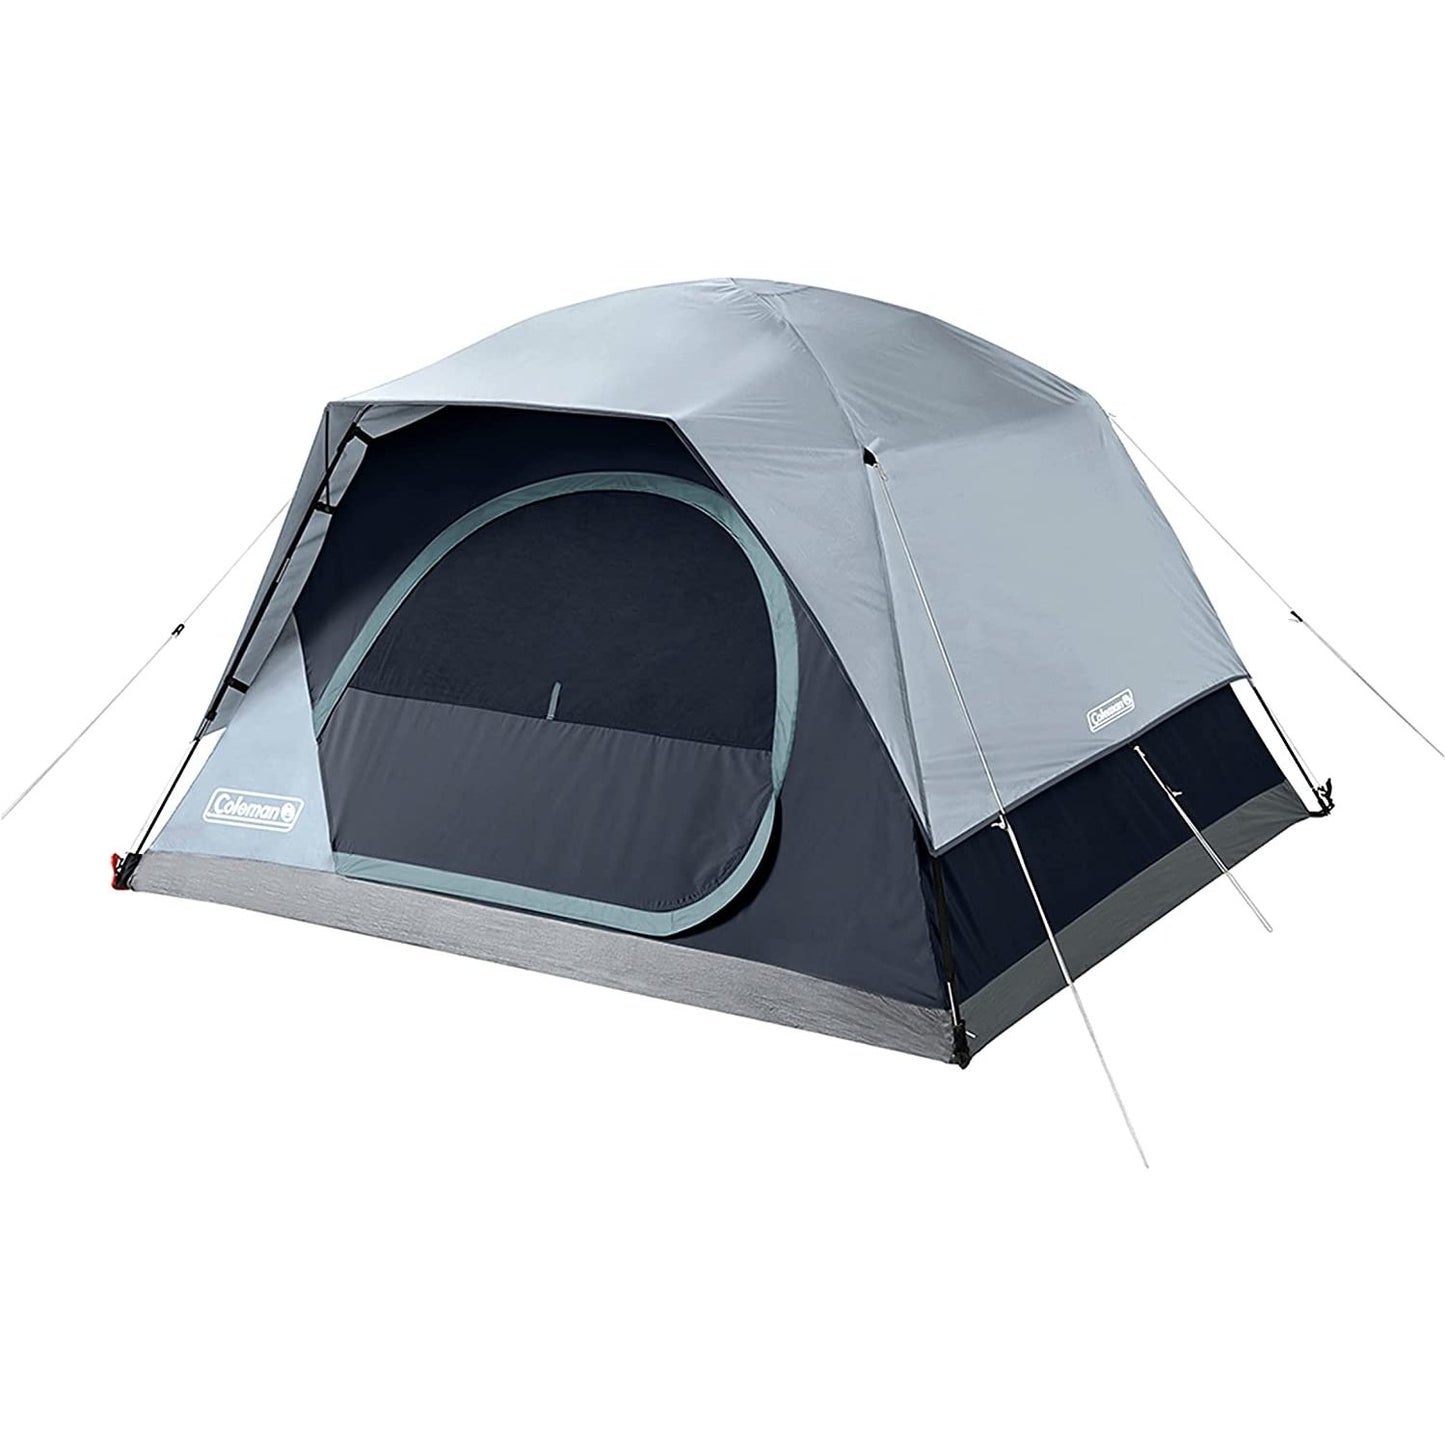 Skydome 4-Person Camping Tent with LED Lighting